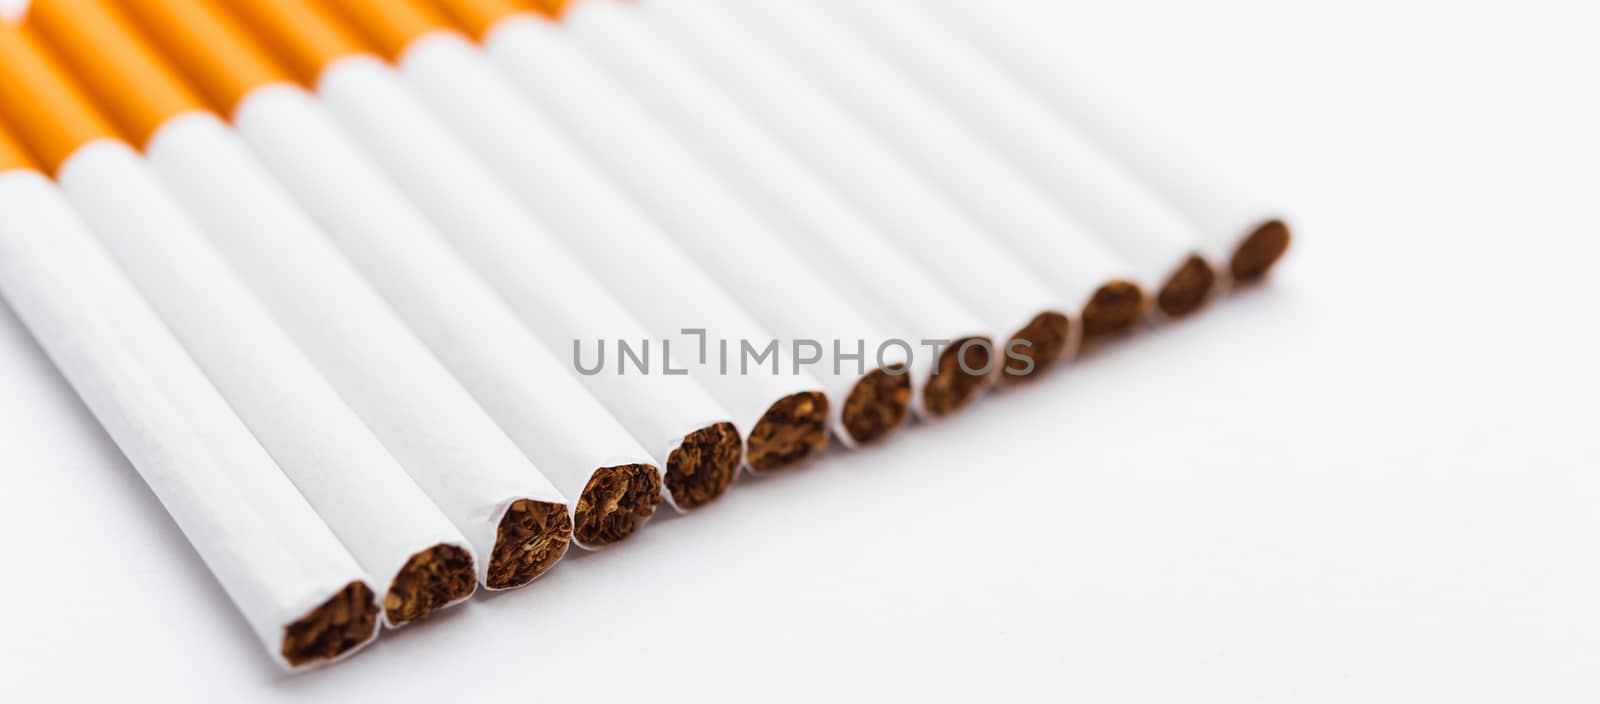 lined up full pile cigarette or tobacco on white background by Sorapop